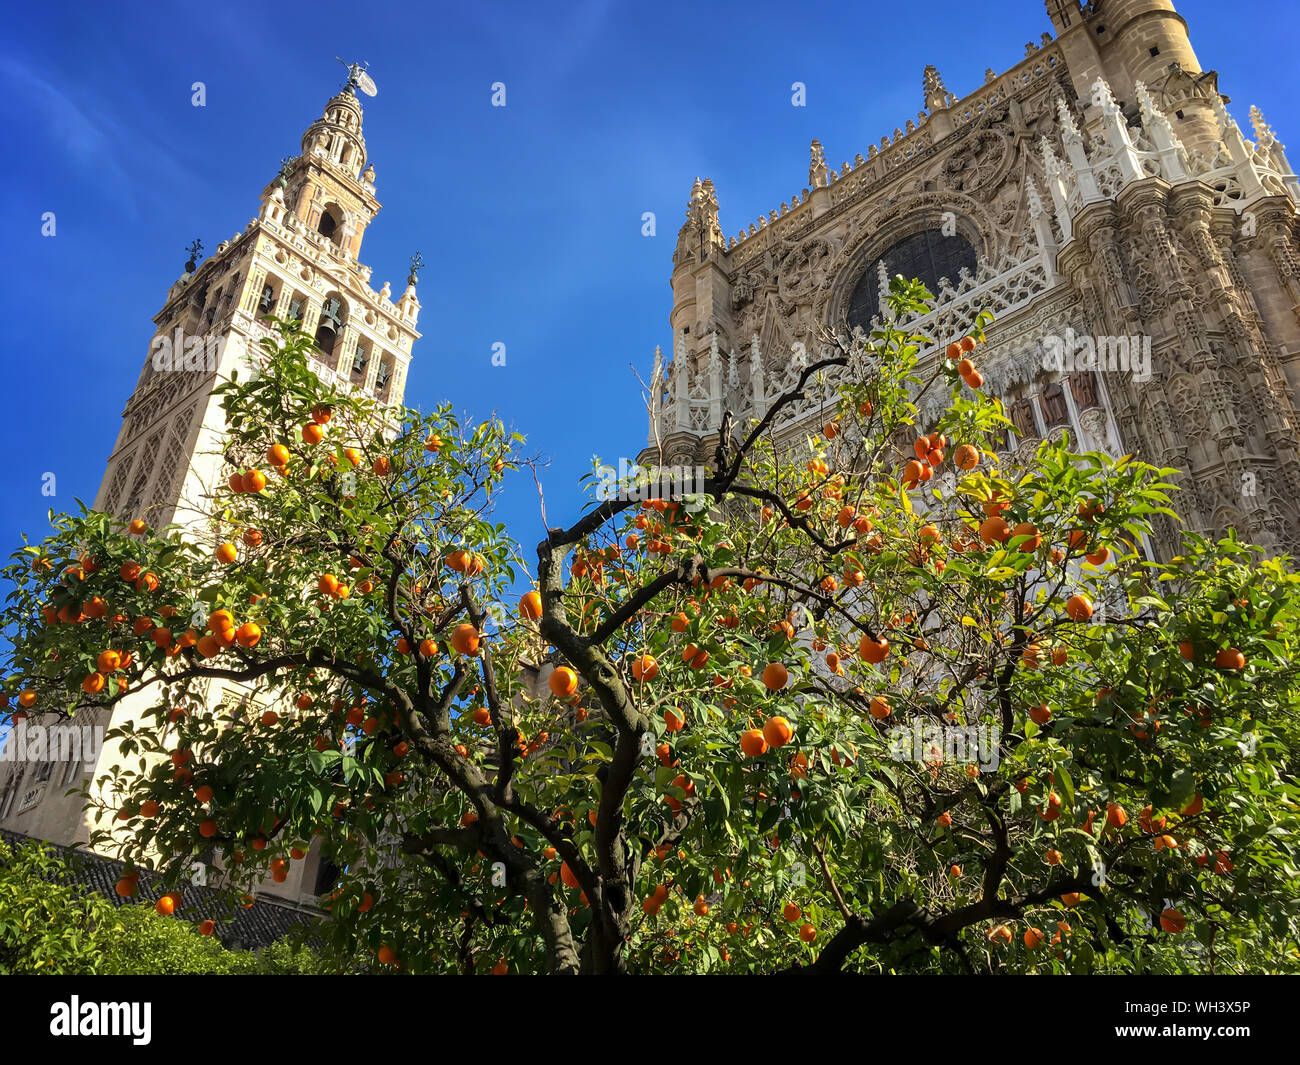 The Giralda, Bell tower of the cathedral of Seville, Andalusia, Spain Stock Photo